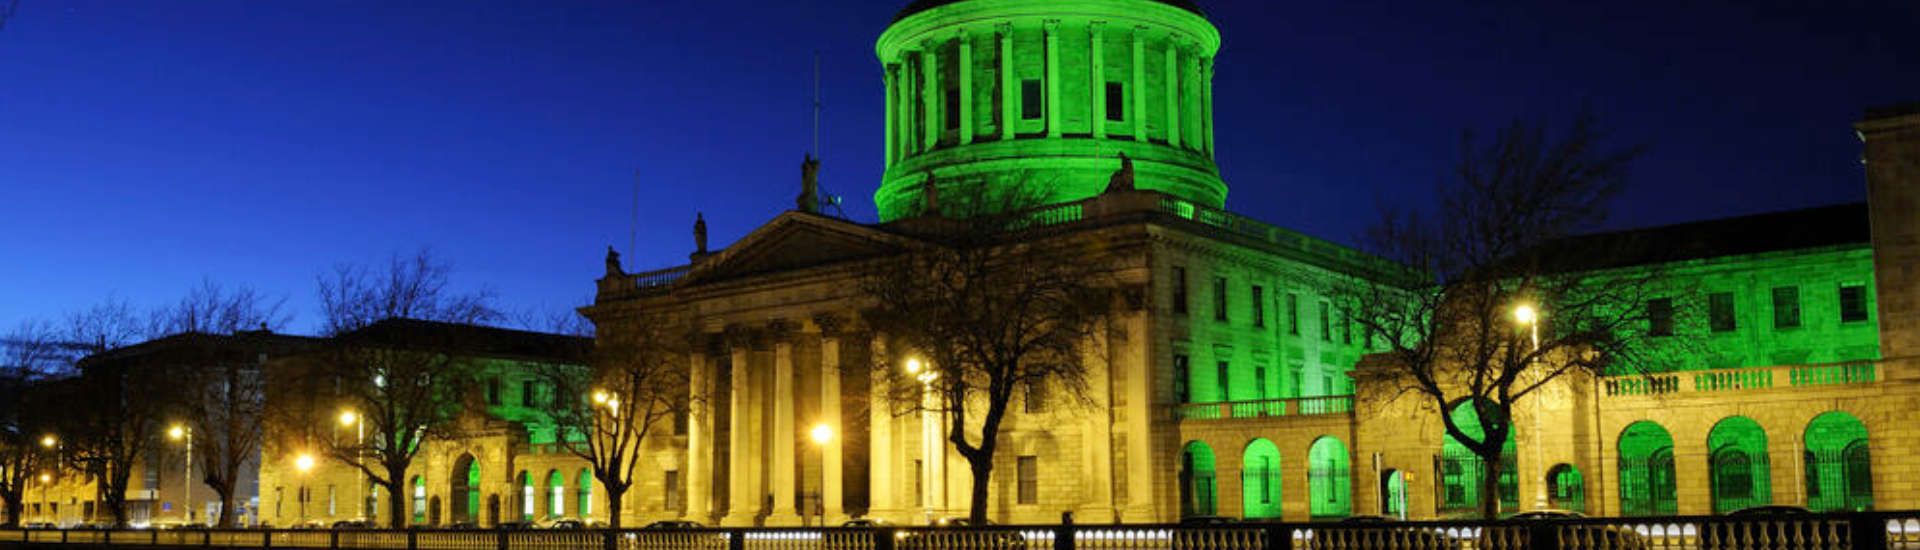 Four Courts, Dublin for St. Patrick's Festival | Family tours of Ireland